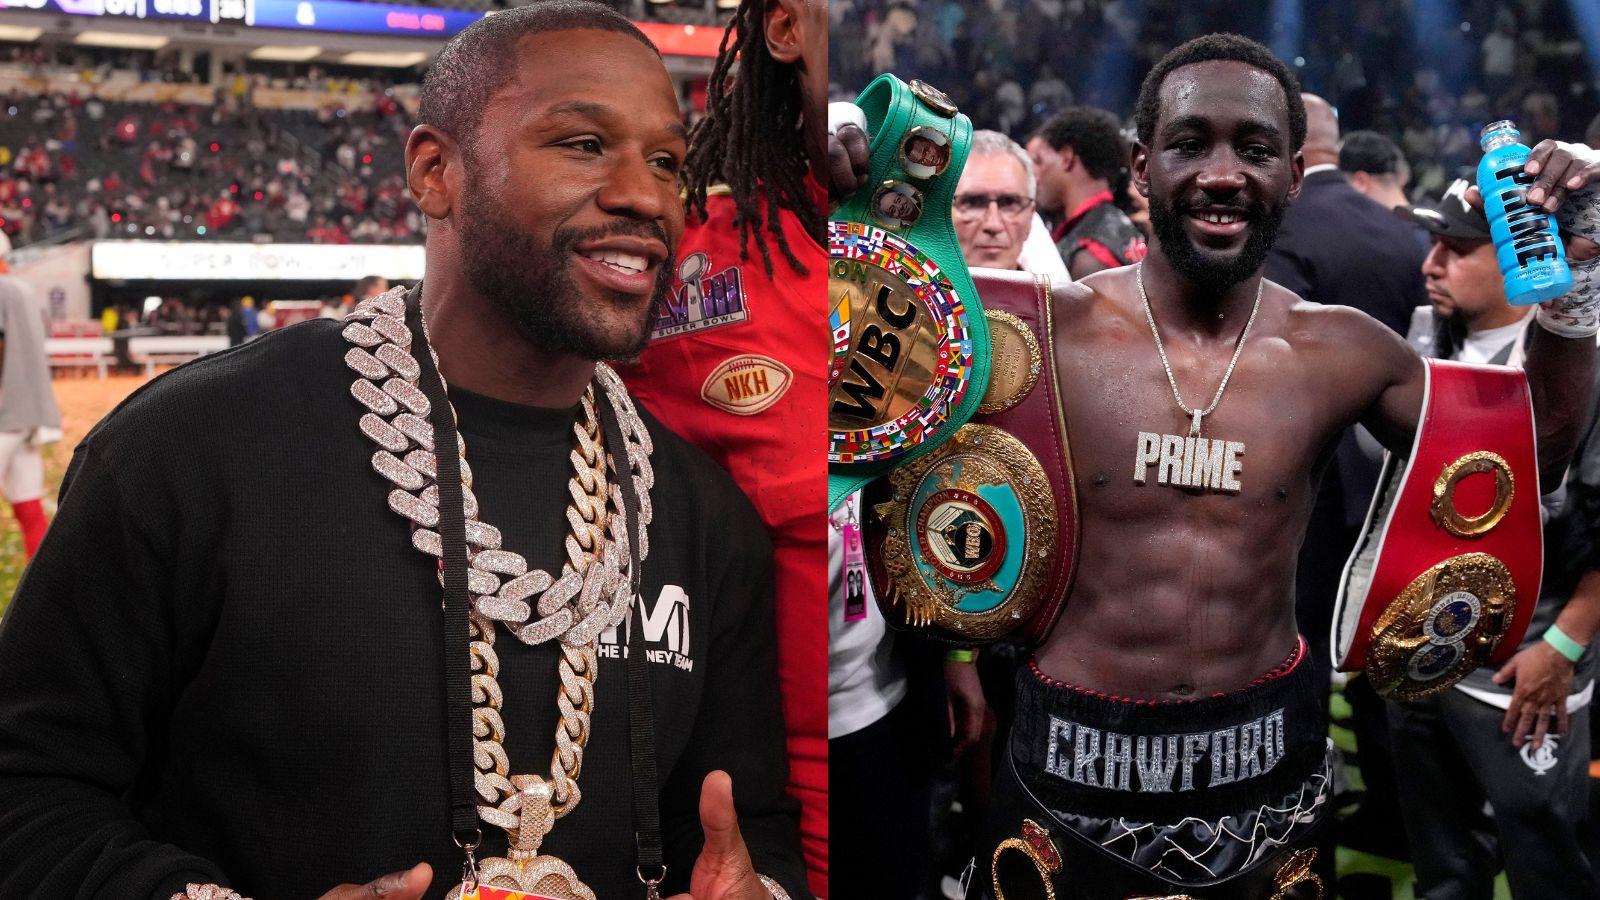 Floyd Mayweather (left) and Terence Crawford in the ring (right).